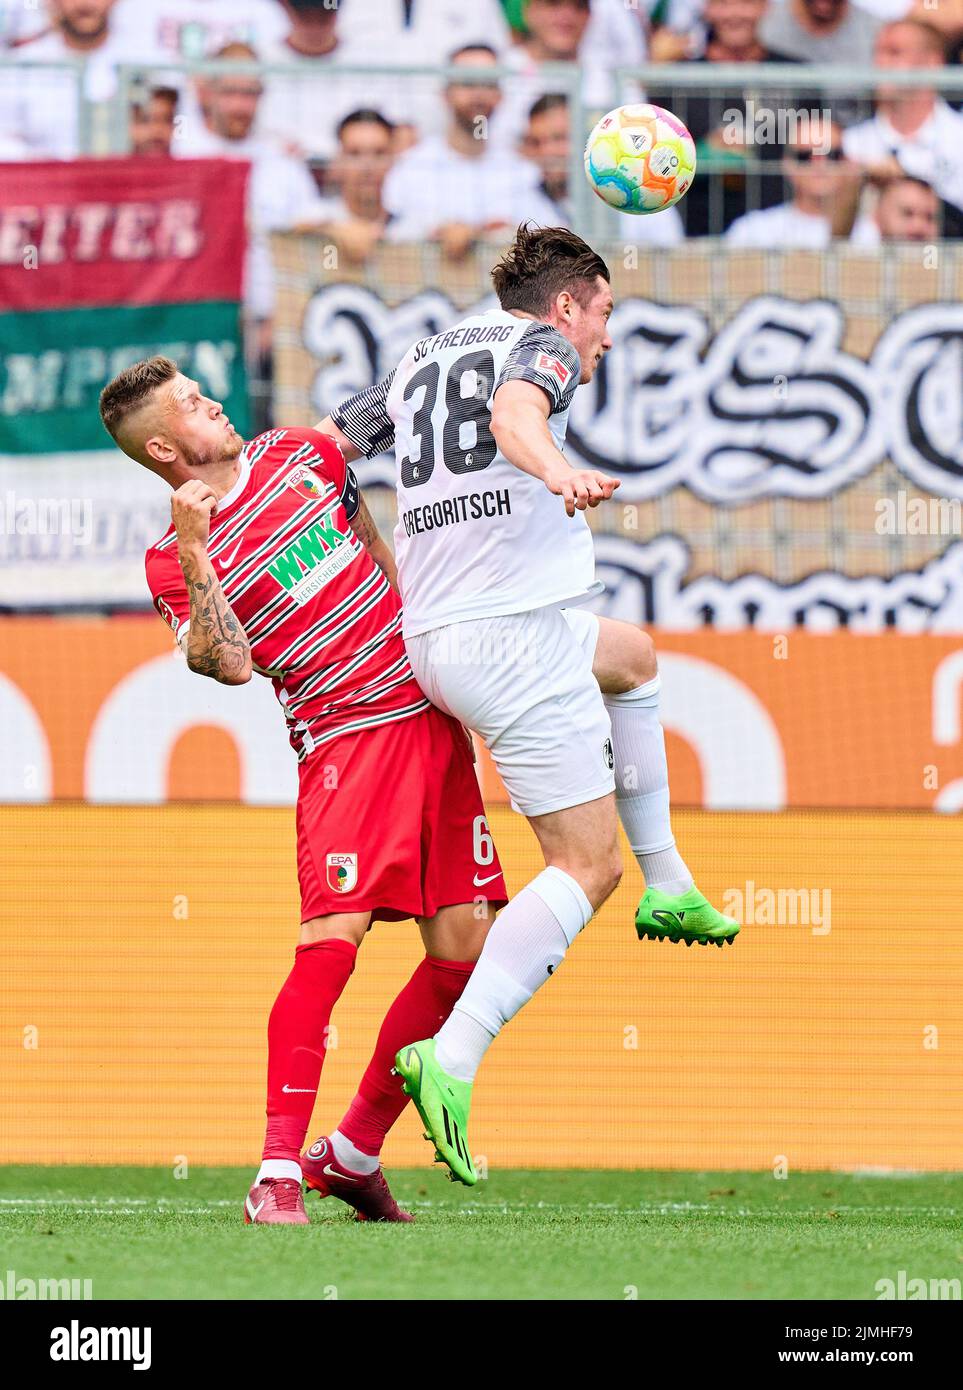 Michael Gregoritsch, FRG 38  compete for the ball, tackling, duel, header, zweikampf, action, fight against  Jeffrey GOUWELEEUW, FCA 6  in the match FC AUGSBURG - SC FREIBURG 0-4 1.German Football League on Aug 06, 2022 in Augsburg, Germany. Season 2022/2023, matchday 1, 1.Bundesliga, FCB, Munich, 1.Spieltag © Peter Schatz / Alamy Live News    - DFL REGULATIONS PROHIBIT ANY USE OF PHOTOGRAPHS as IMAGE SEQUENCES and/or QUASI-VIDEO - Stock Photo